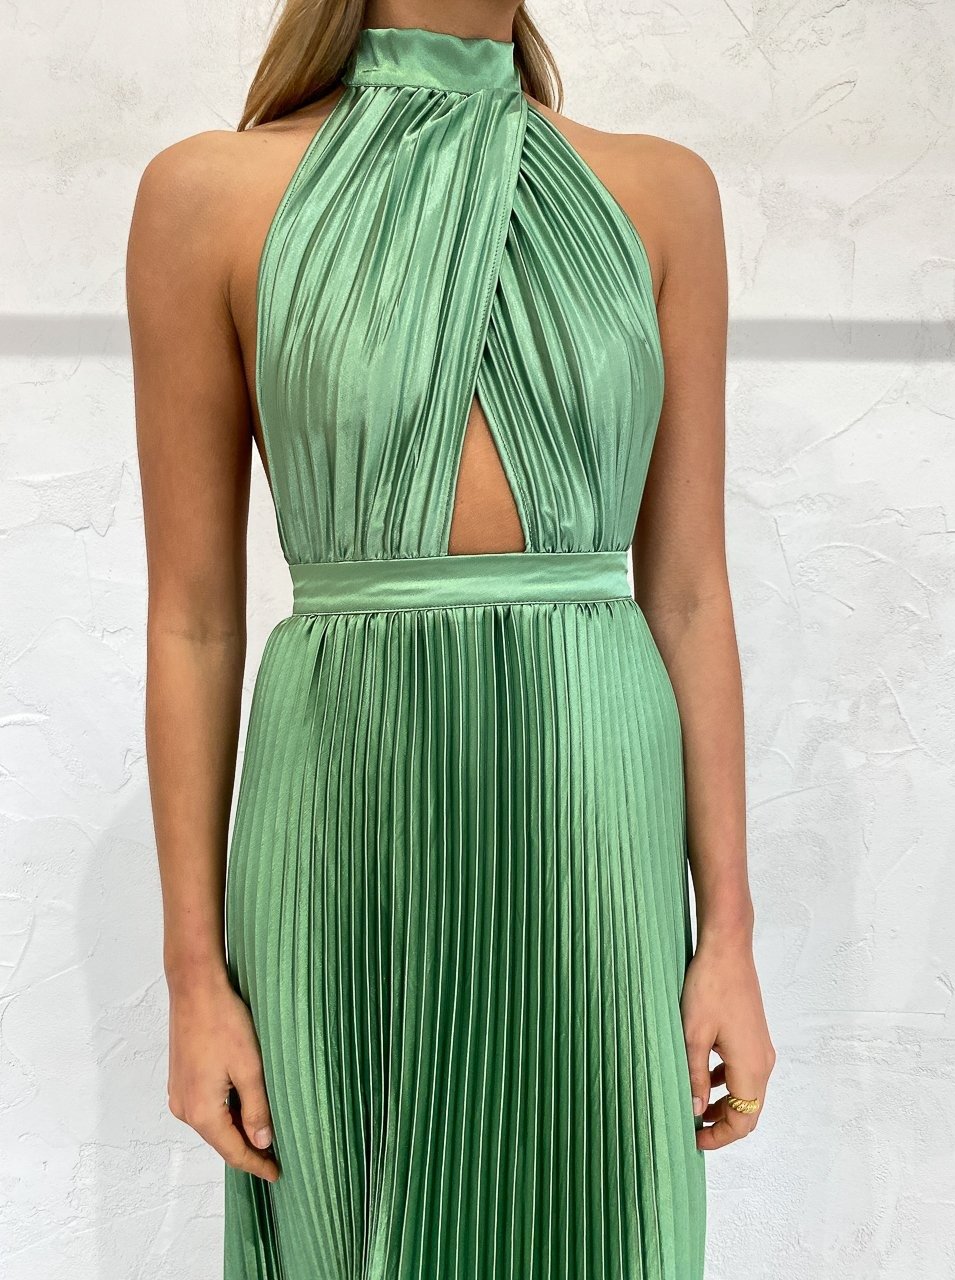 Renaissance Gown in Sea Green - L'IDEE